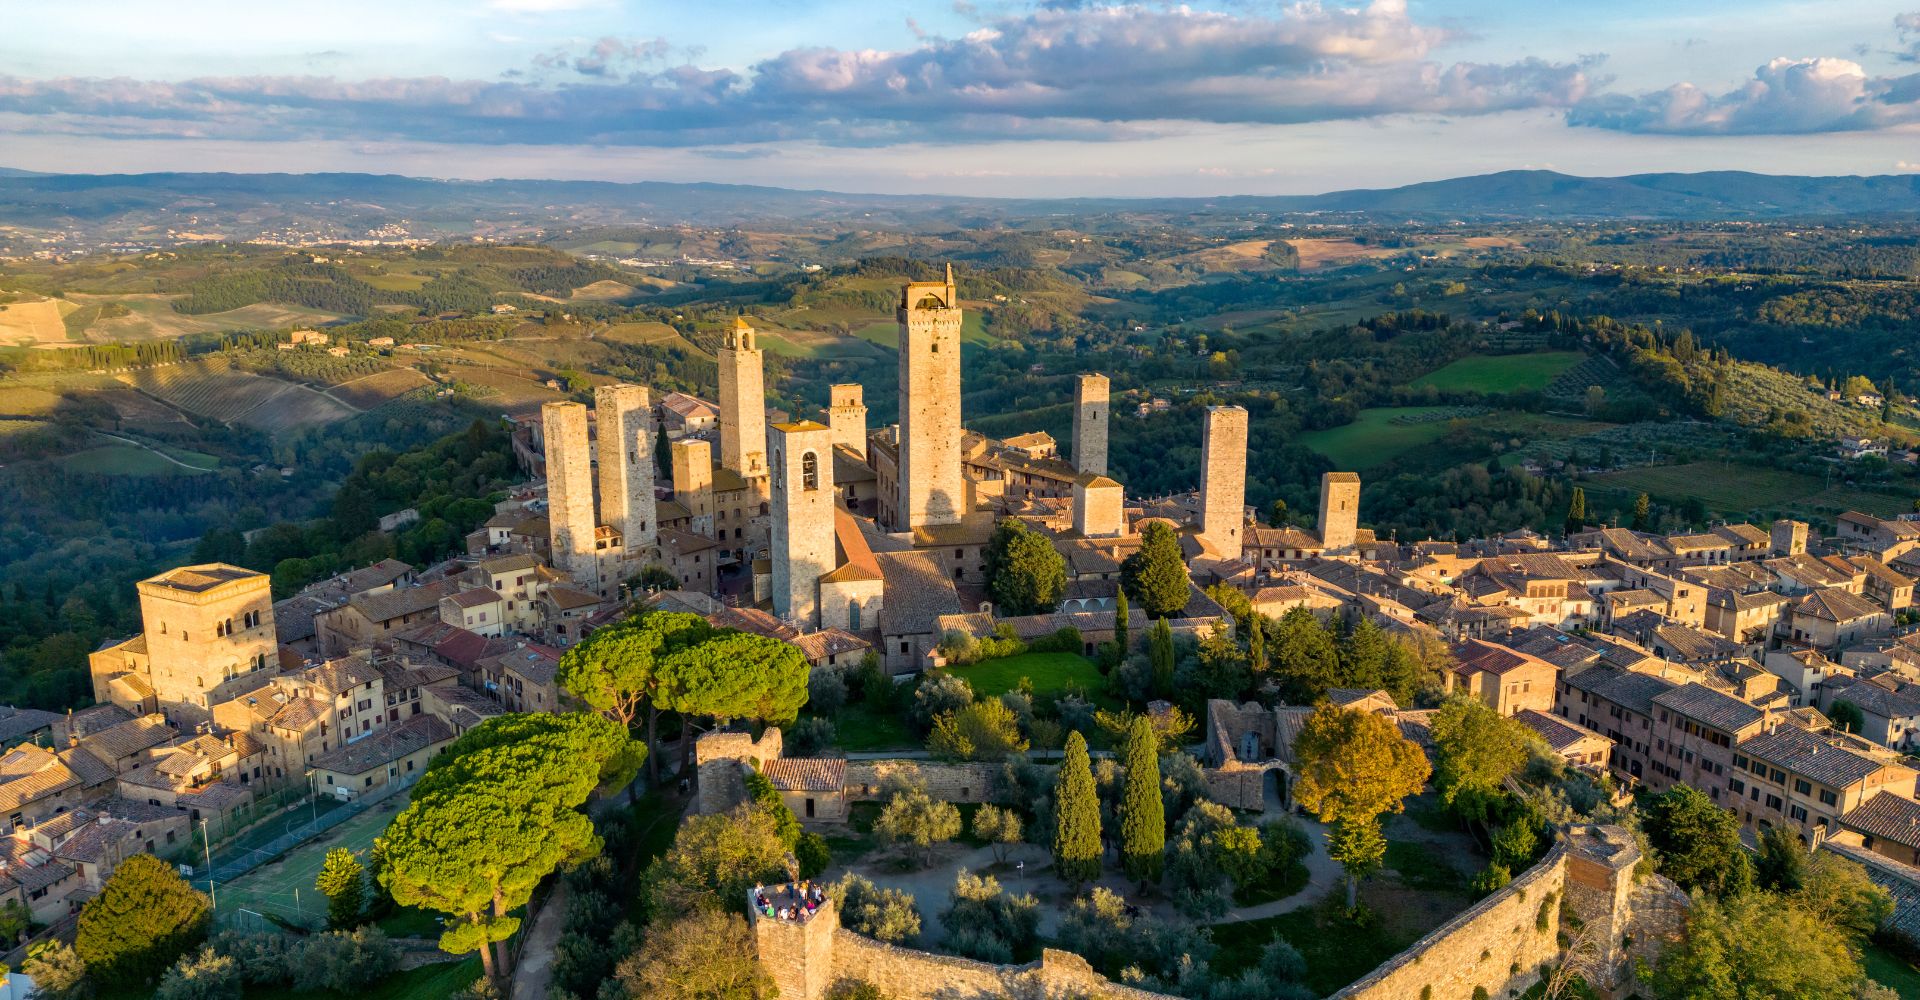 Eight days cycling between San Gimignano and Volterra